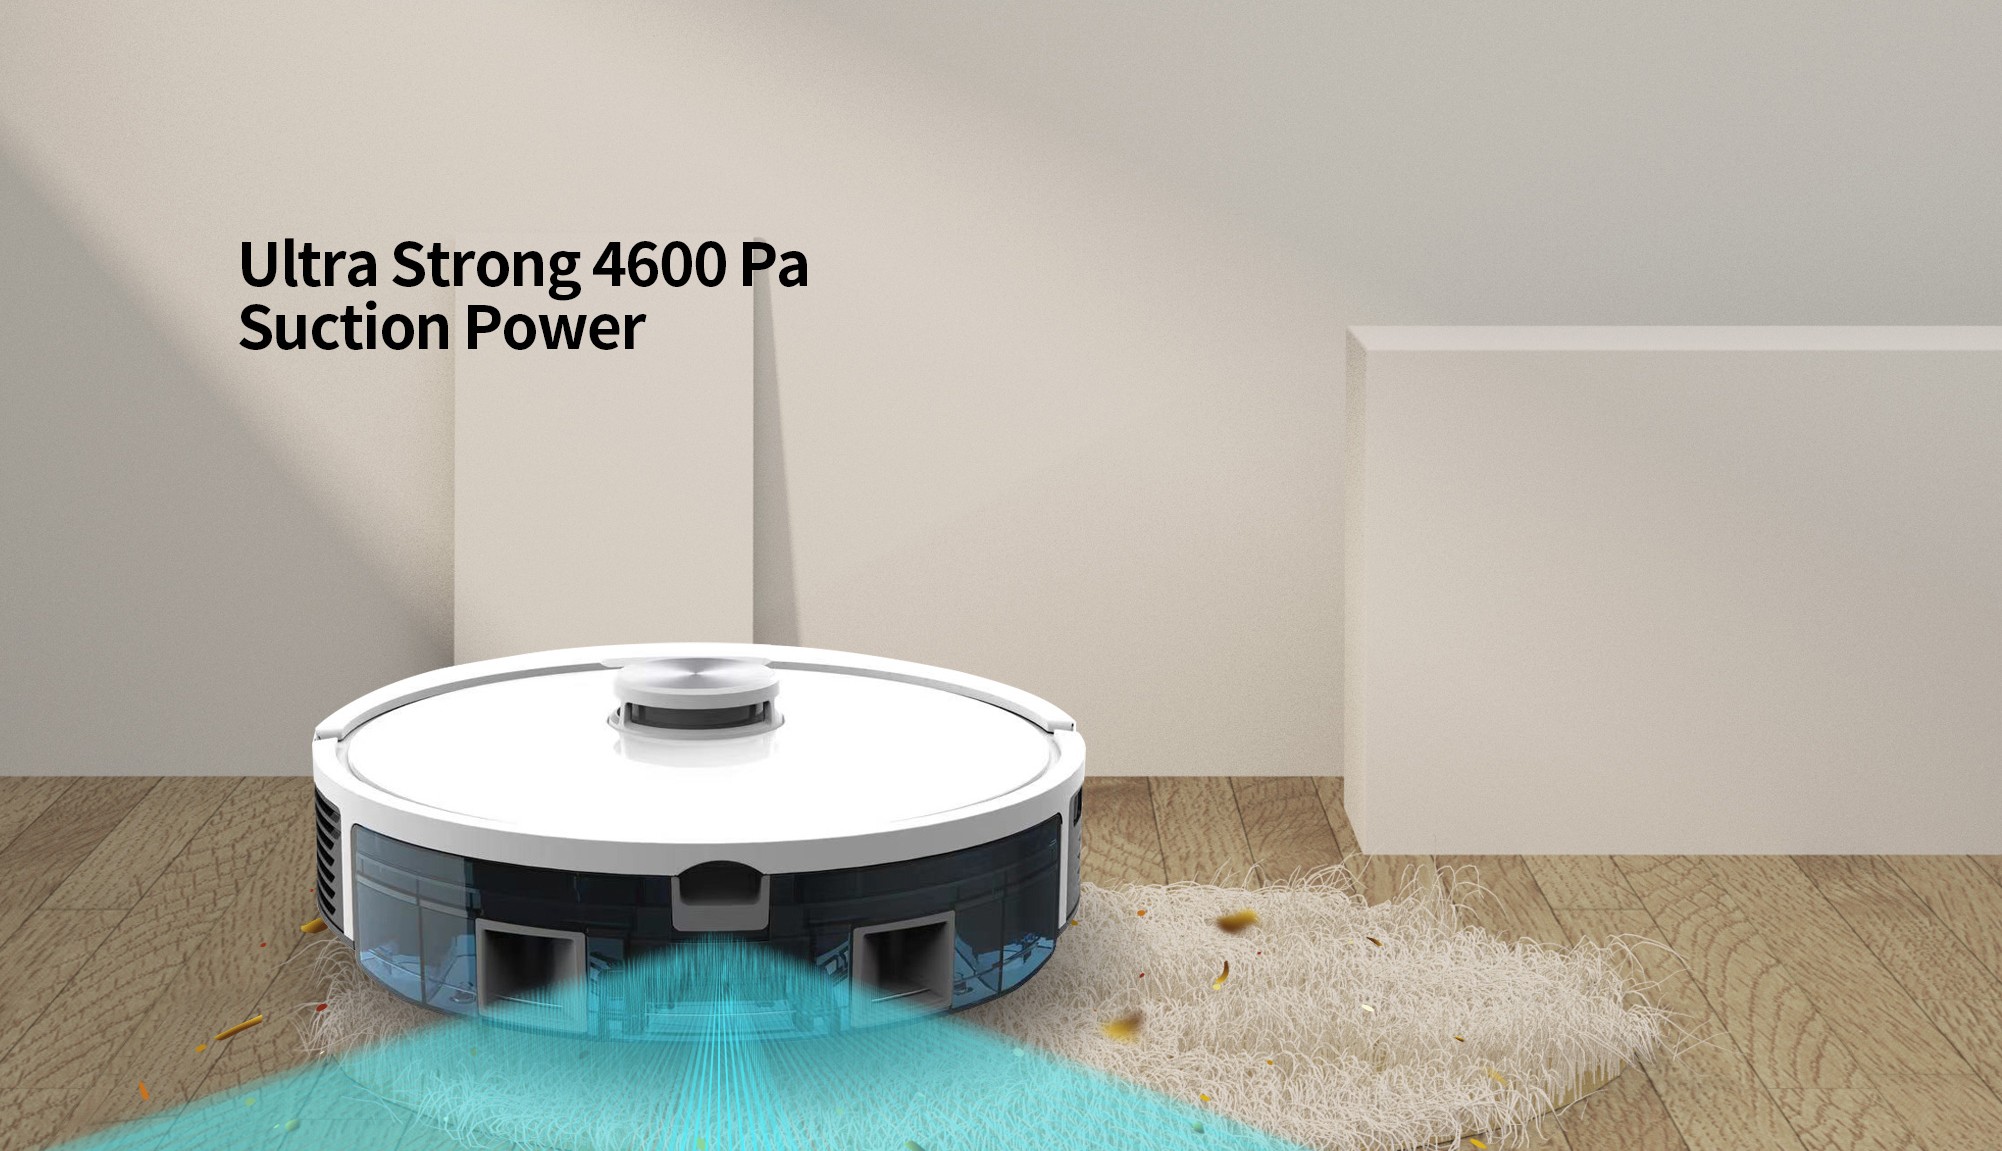 Smart-Home-Appliances-Robot-Vacuum-and-Mop-Combo-Seedream-SM10191-WiFi-App-Robotic-Vacuum-Cleaner-with-Schedule-2-in-1-Mopping-Robot-Vacuum-with-Watertank-and-Dustbin-36